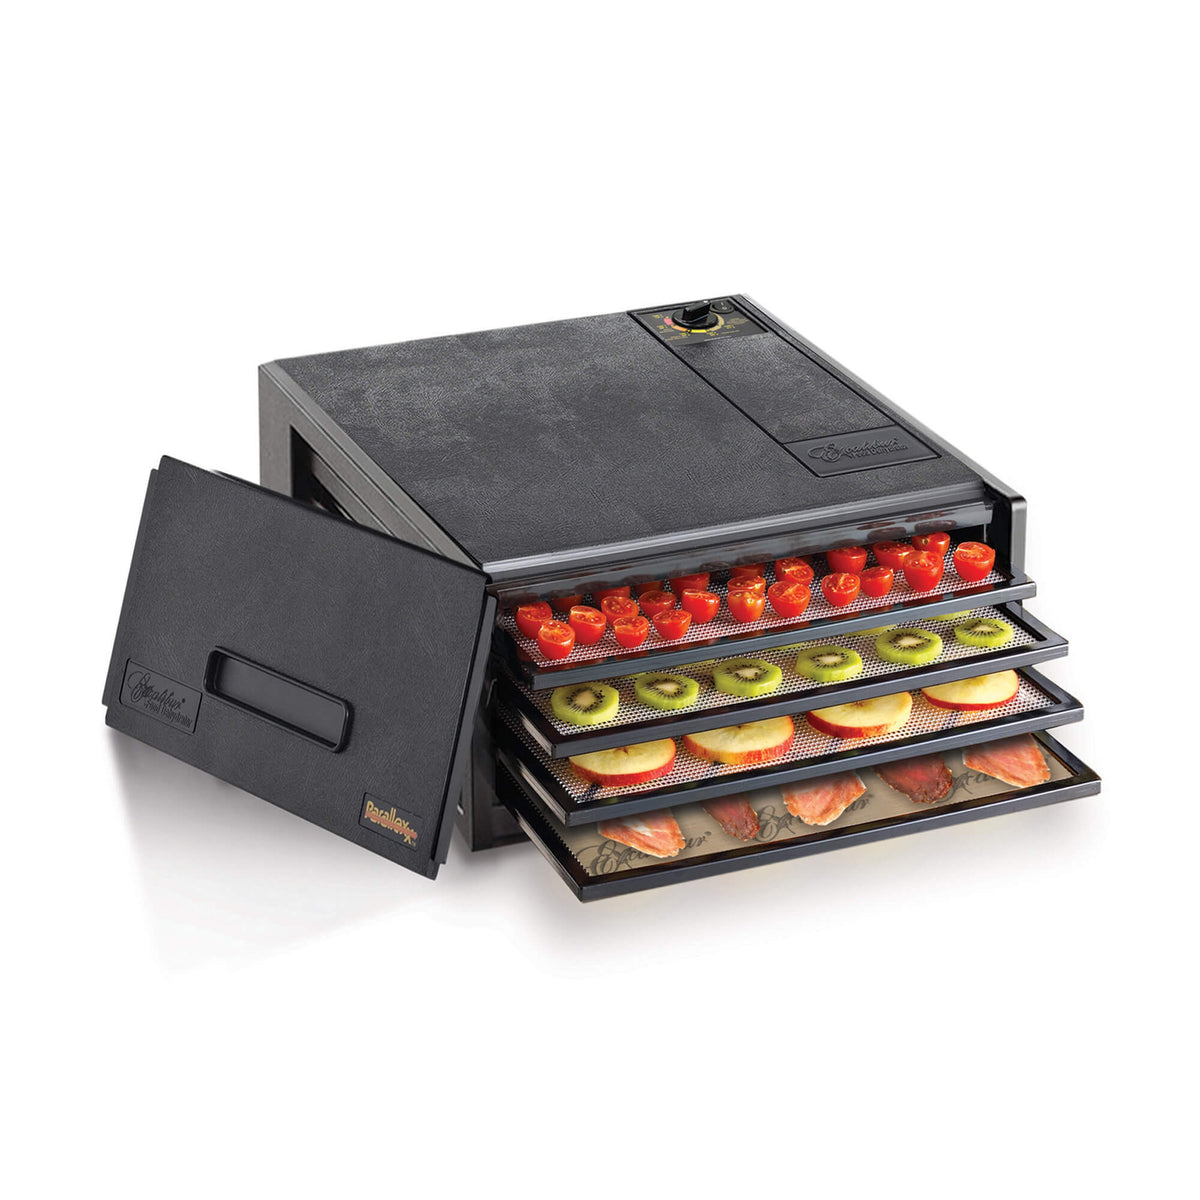 Excalibur 4400 4 tray compact dehydrator with door propped to the side and food on the trays.